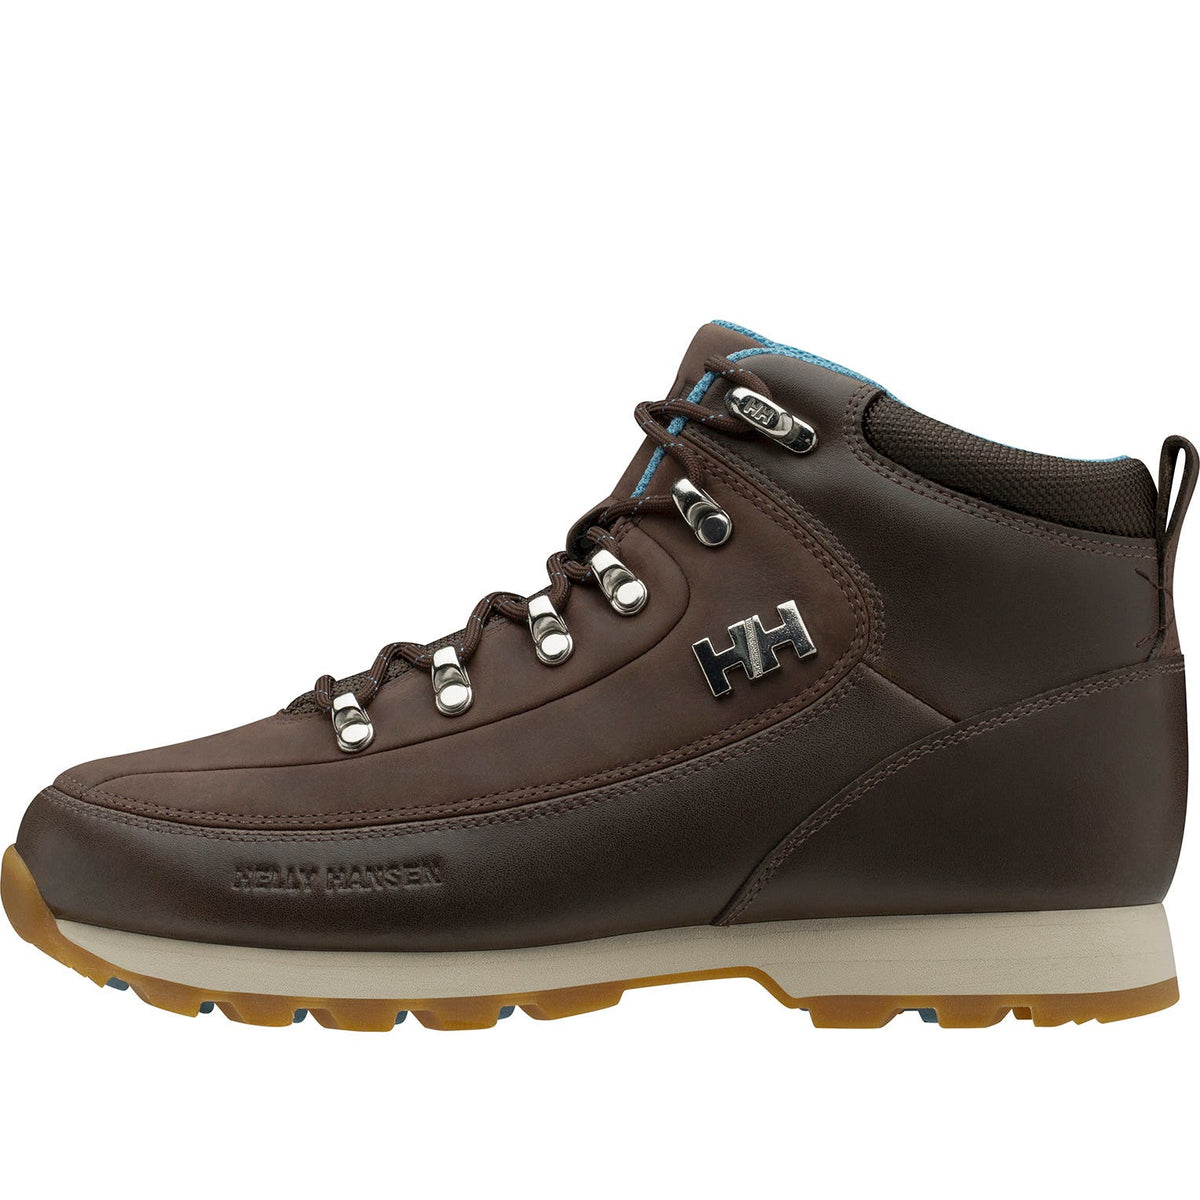 Women's Helly Hansen The Forester Winter Boot | Outdoor, Trail, Snow ...